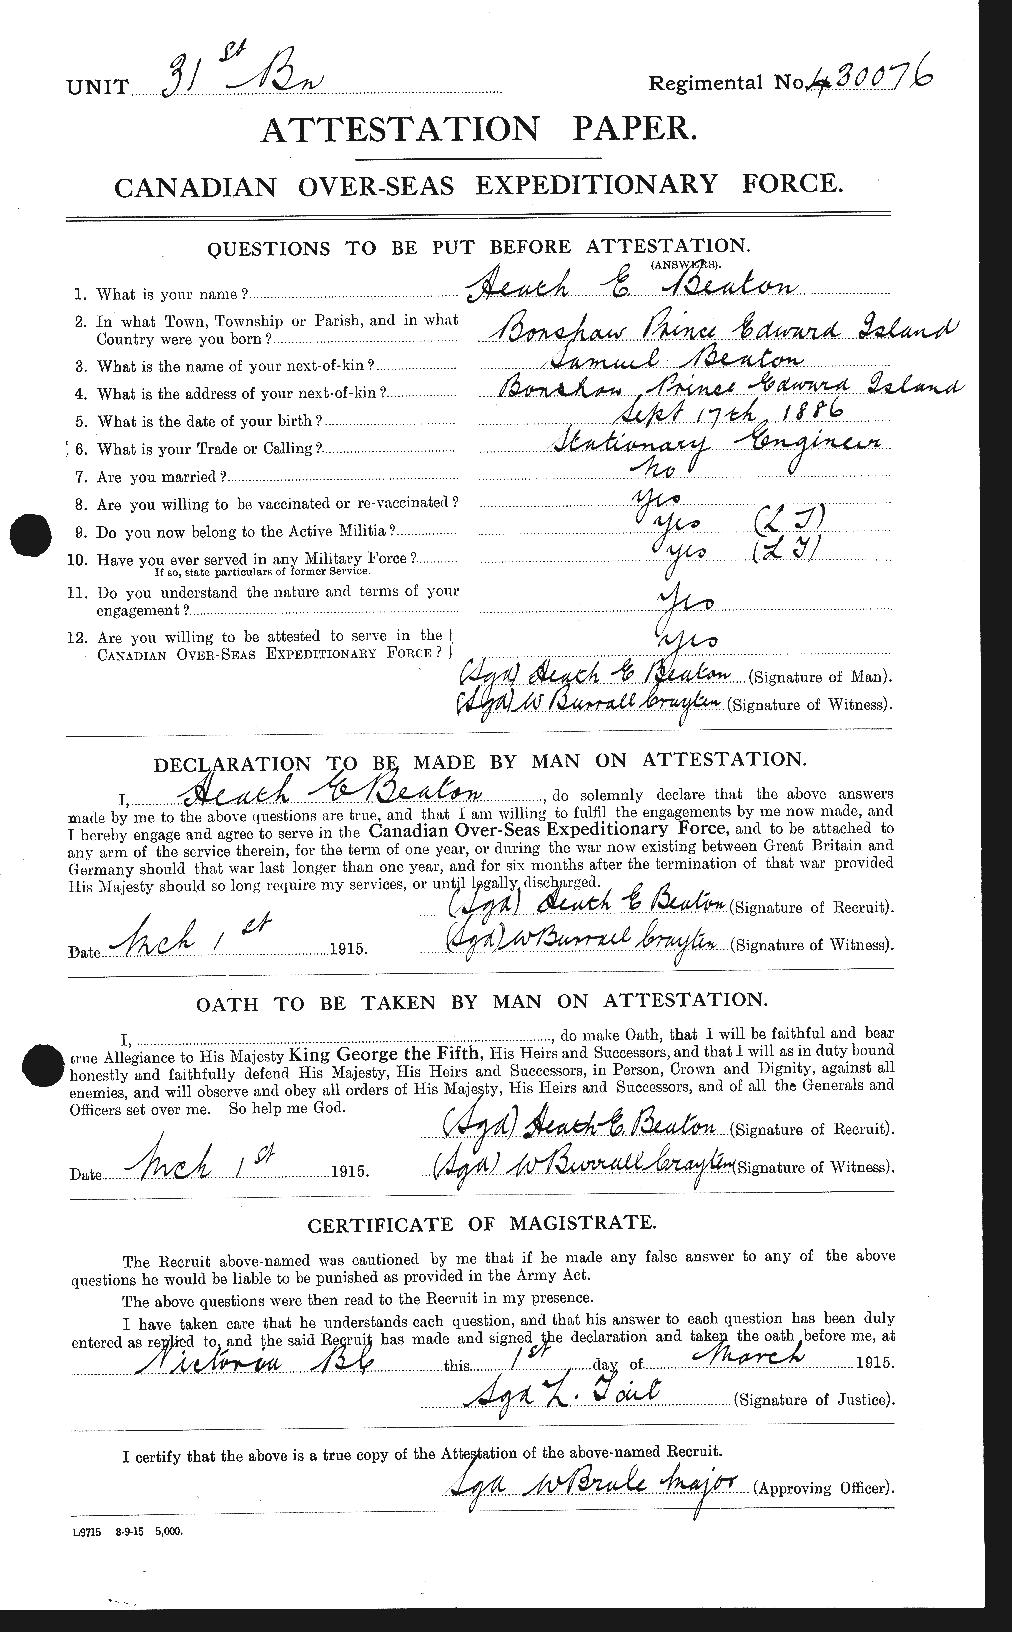 Personnel Records of the First World War - CEF 230510a